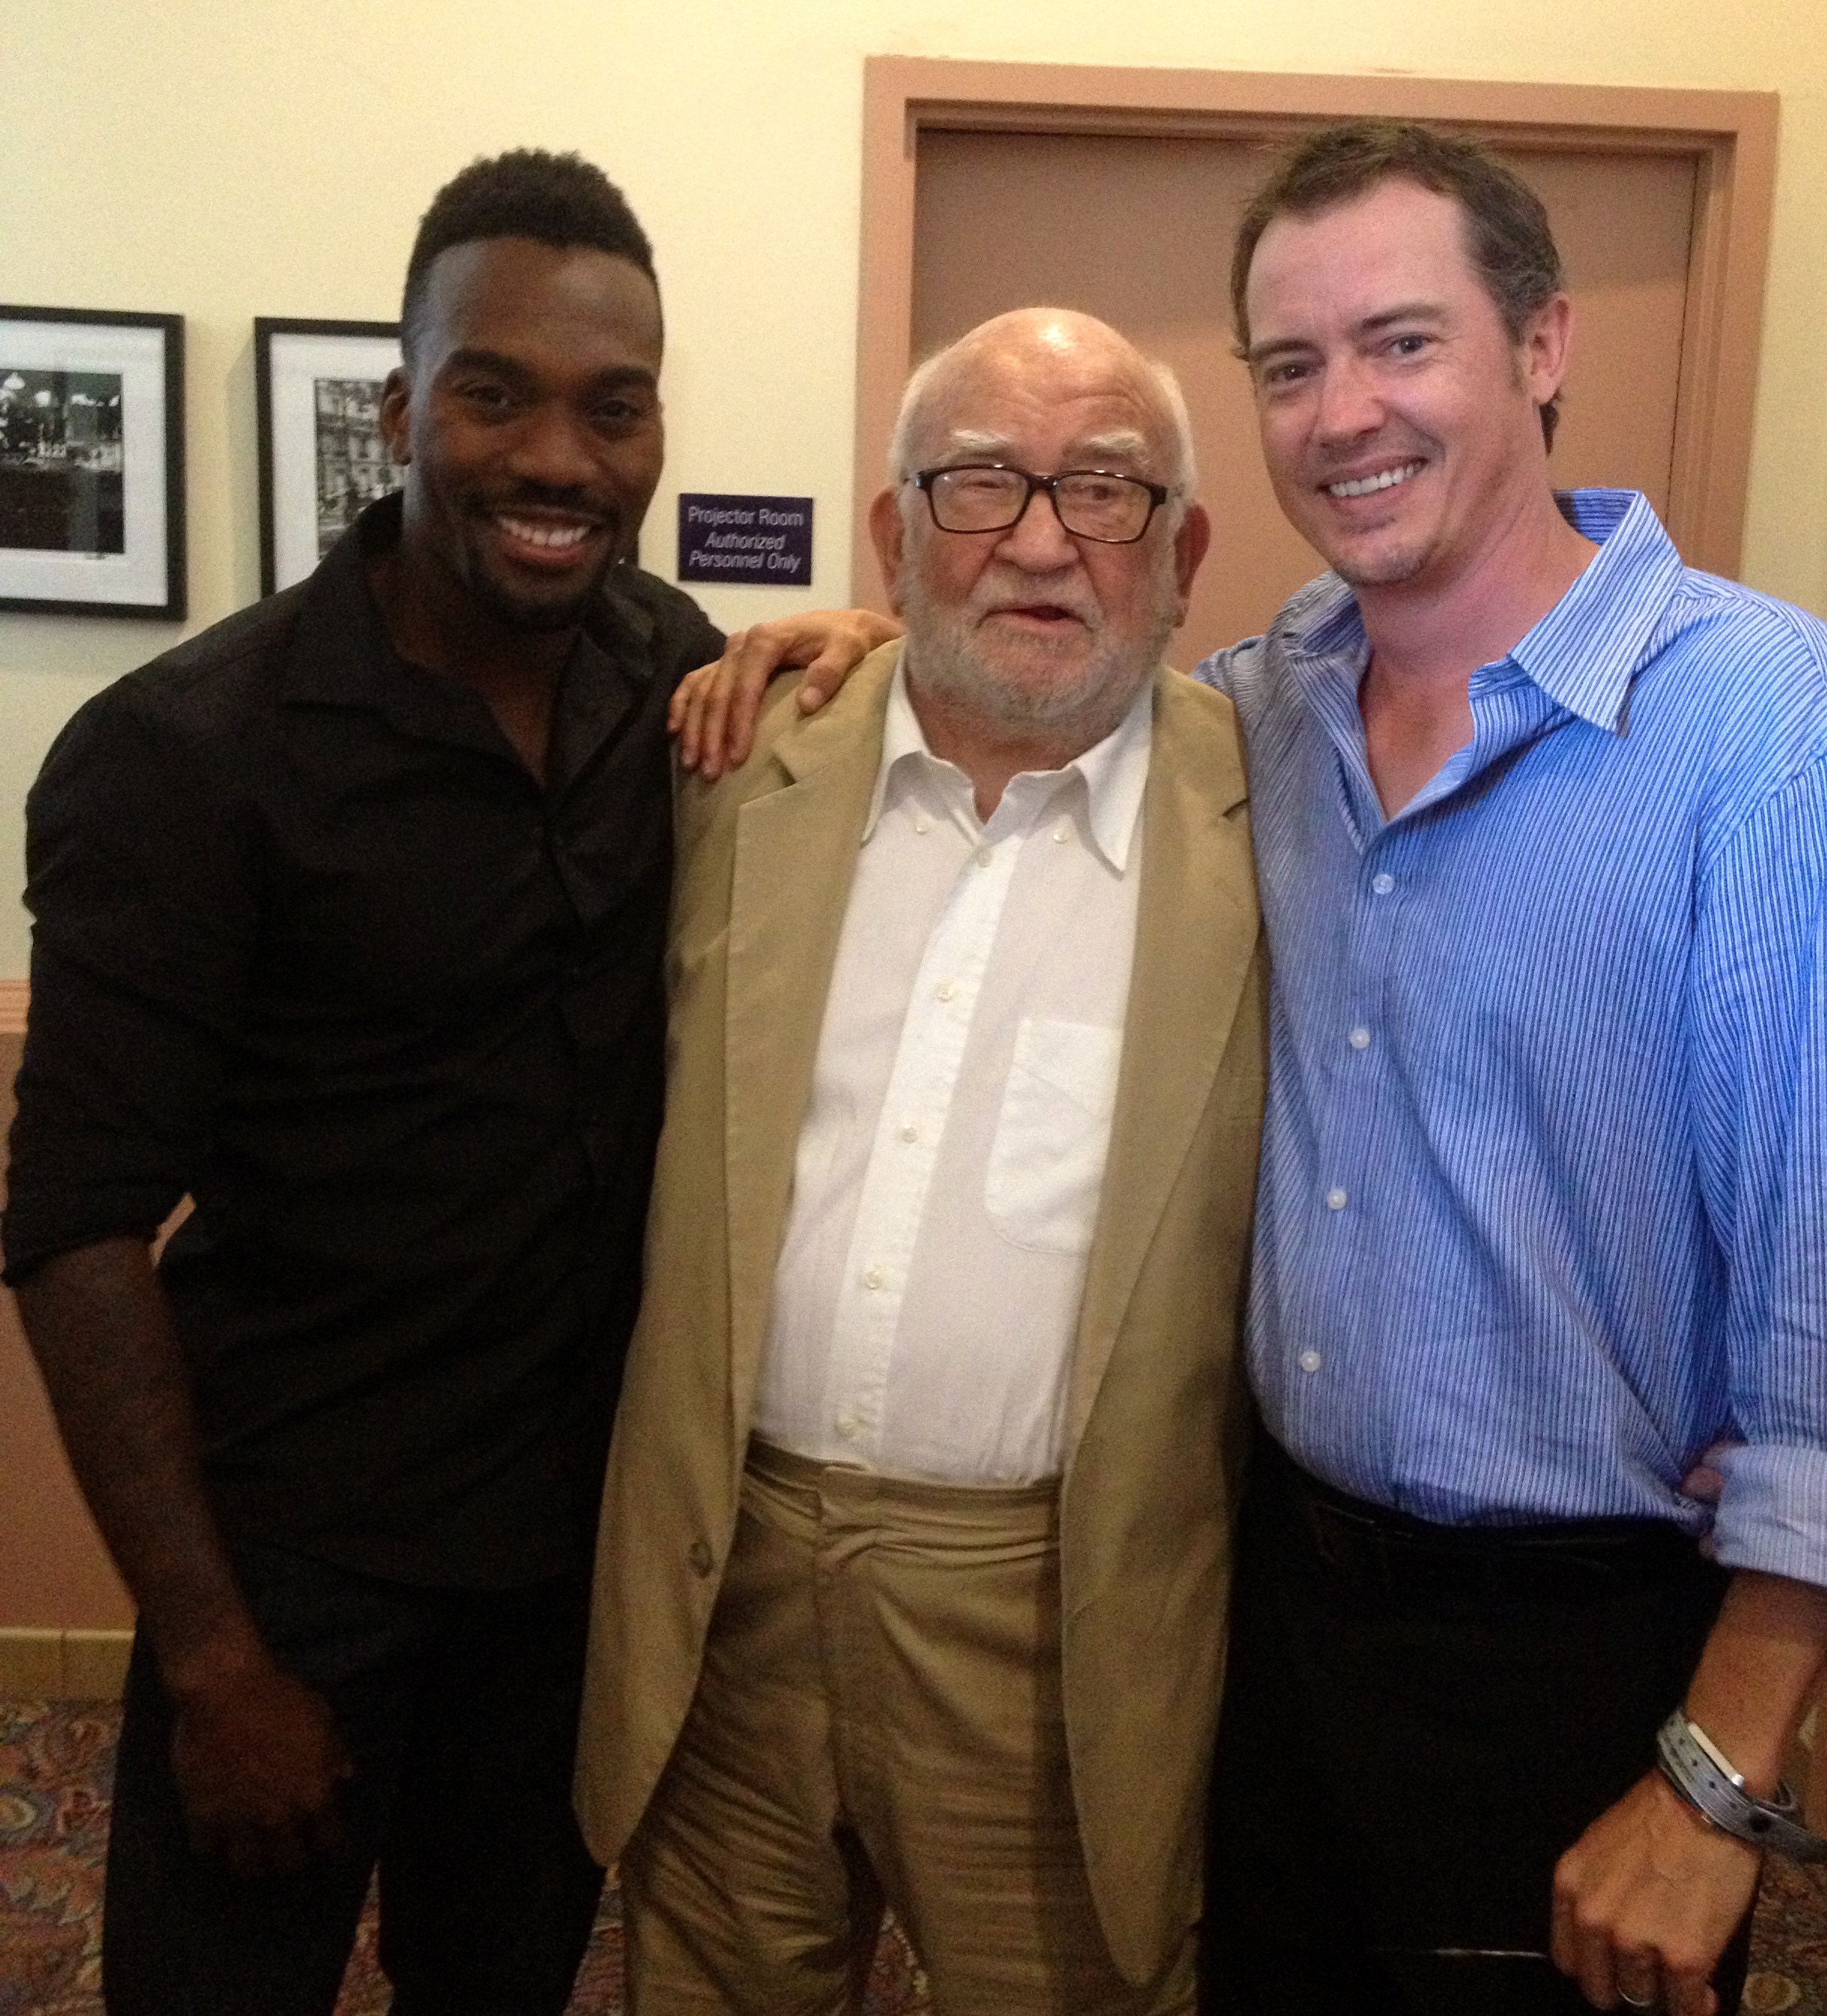 Tysen Knight, Ed Asner and Jason London at the AMFM Fest 2013